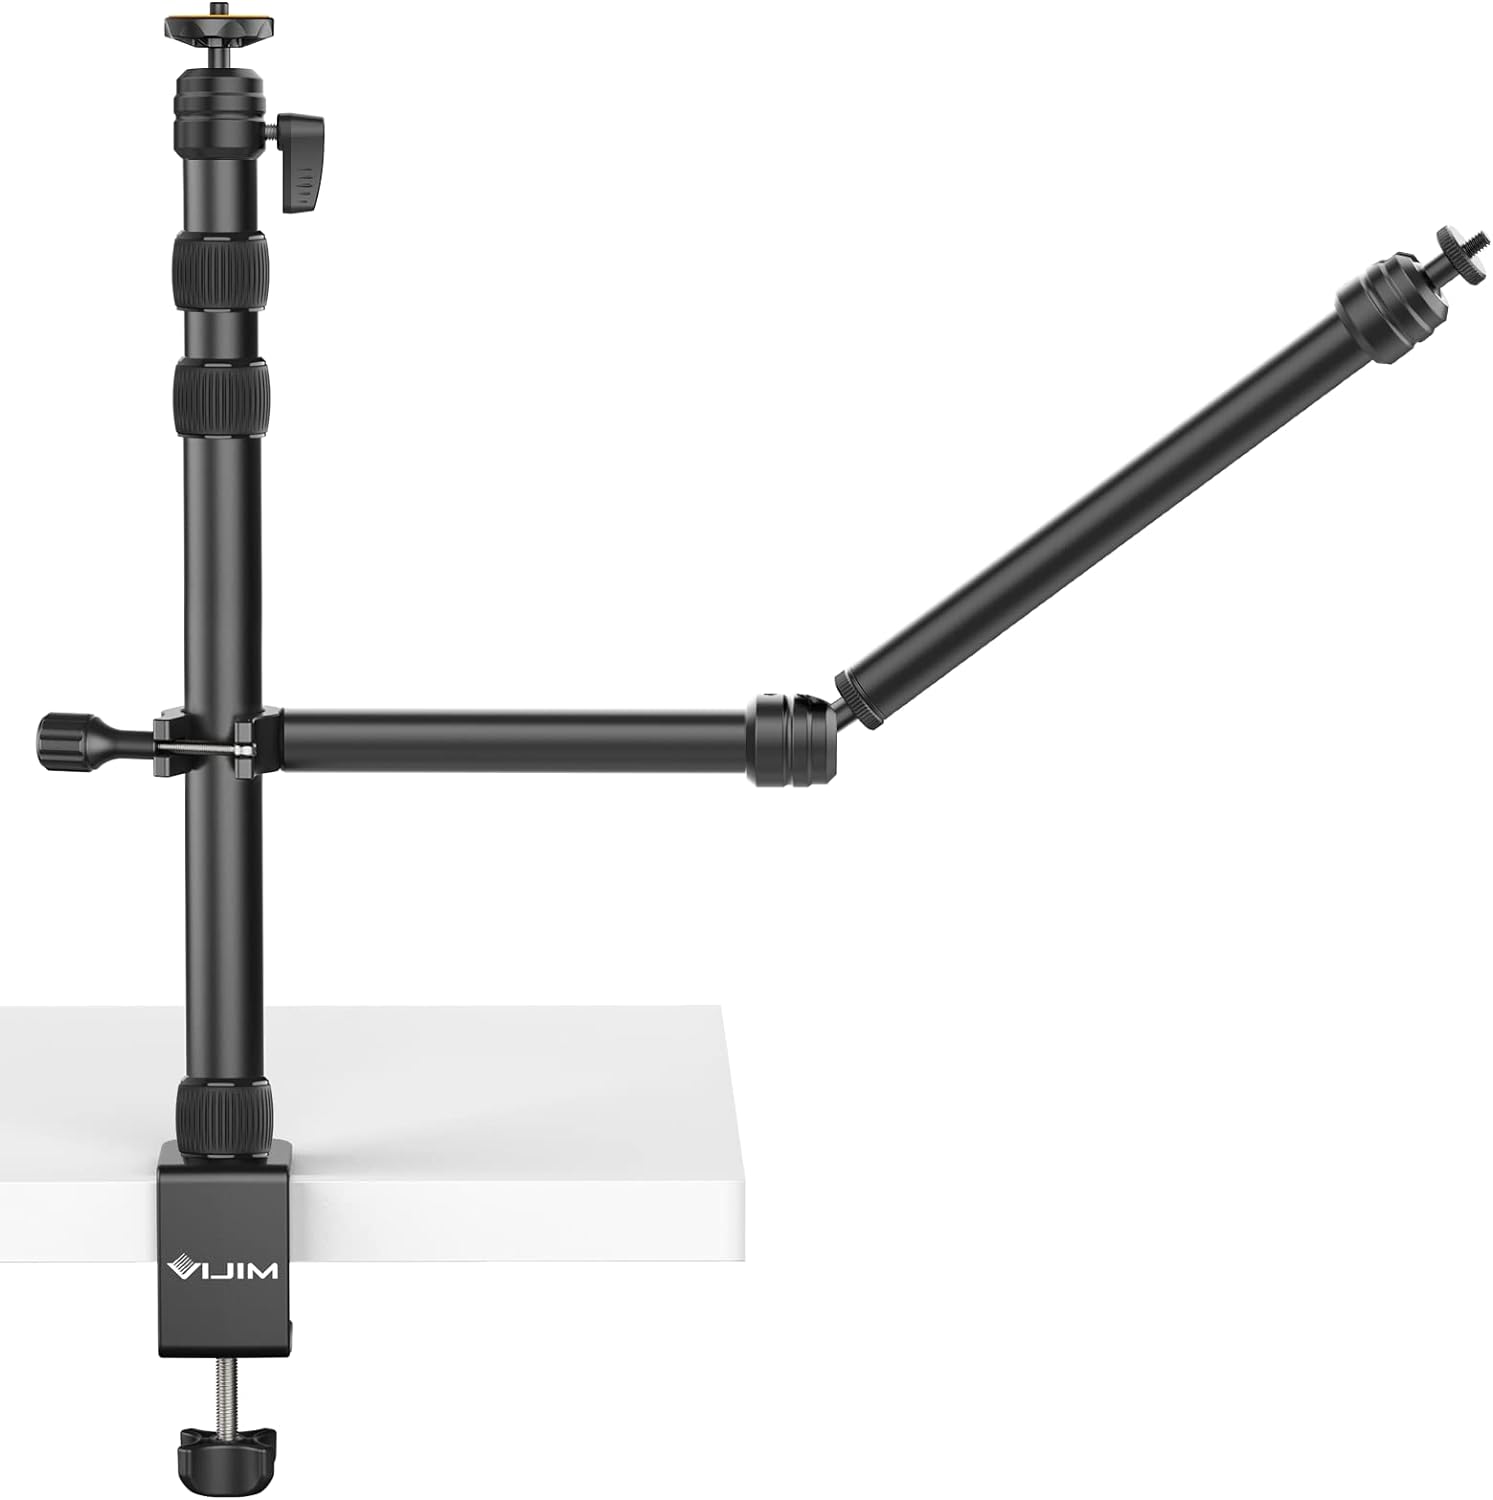 Utilizing Overhead Camera Mounts for Professional Product Photography